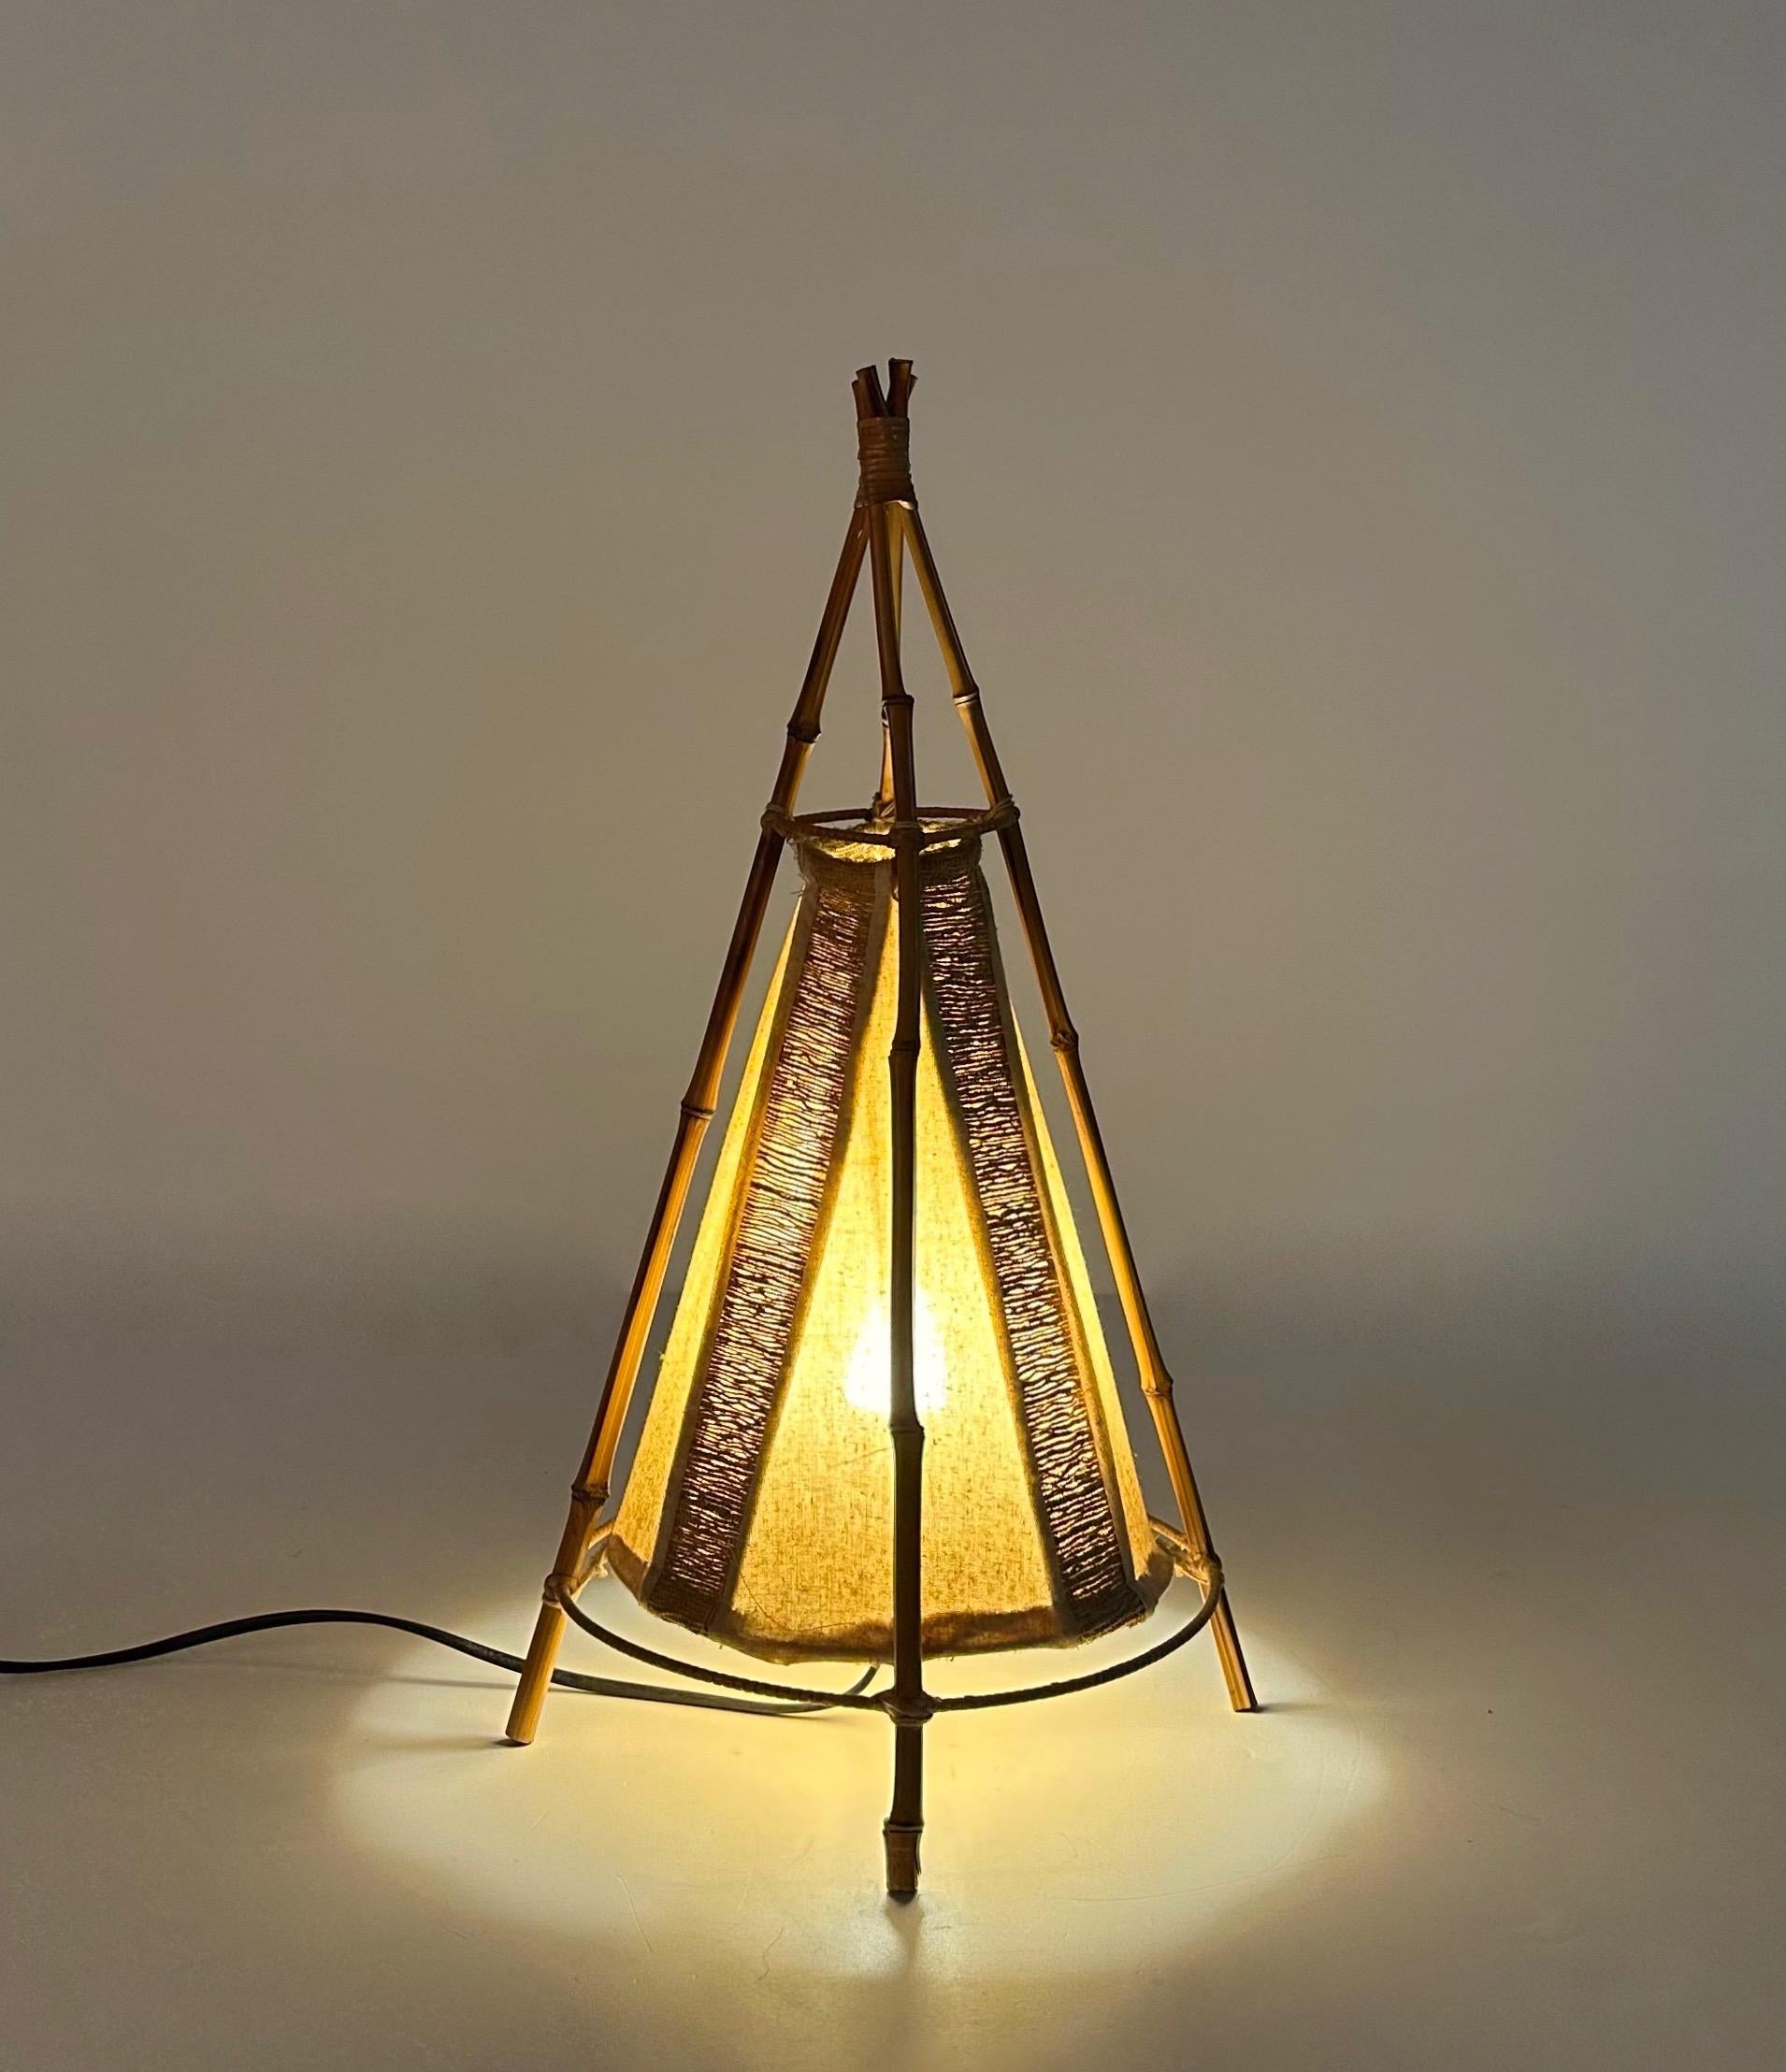 Louis Sognot Midcentury Cotton, Bamboo and Rattan Italian Table Lamp, 1950s For Sale 1